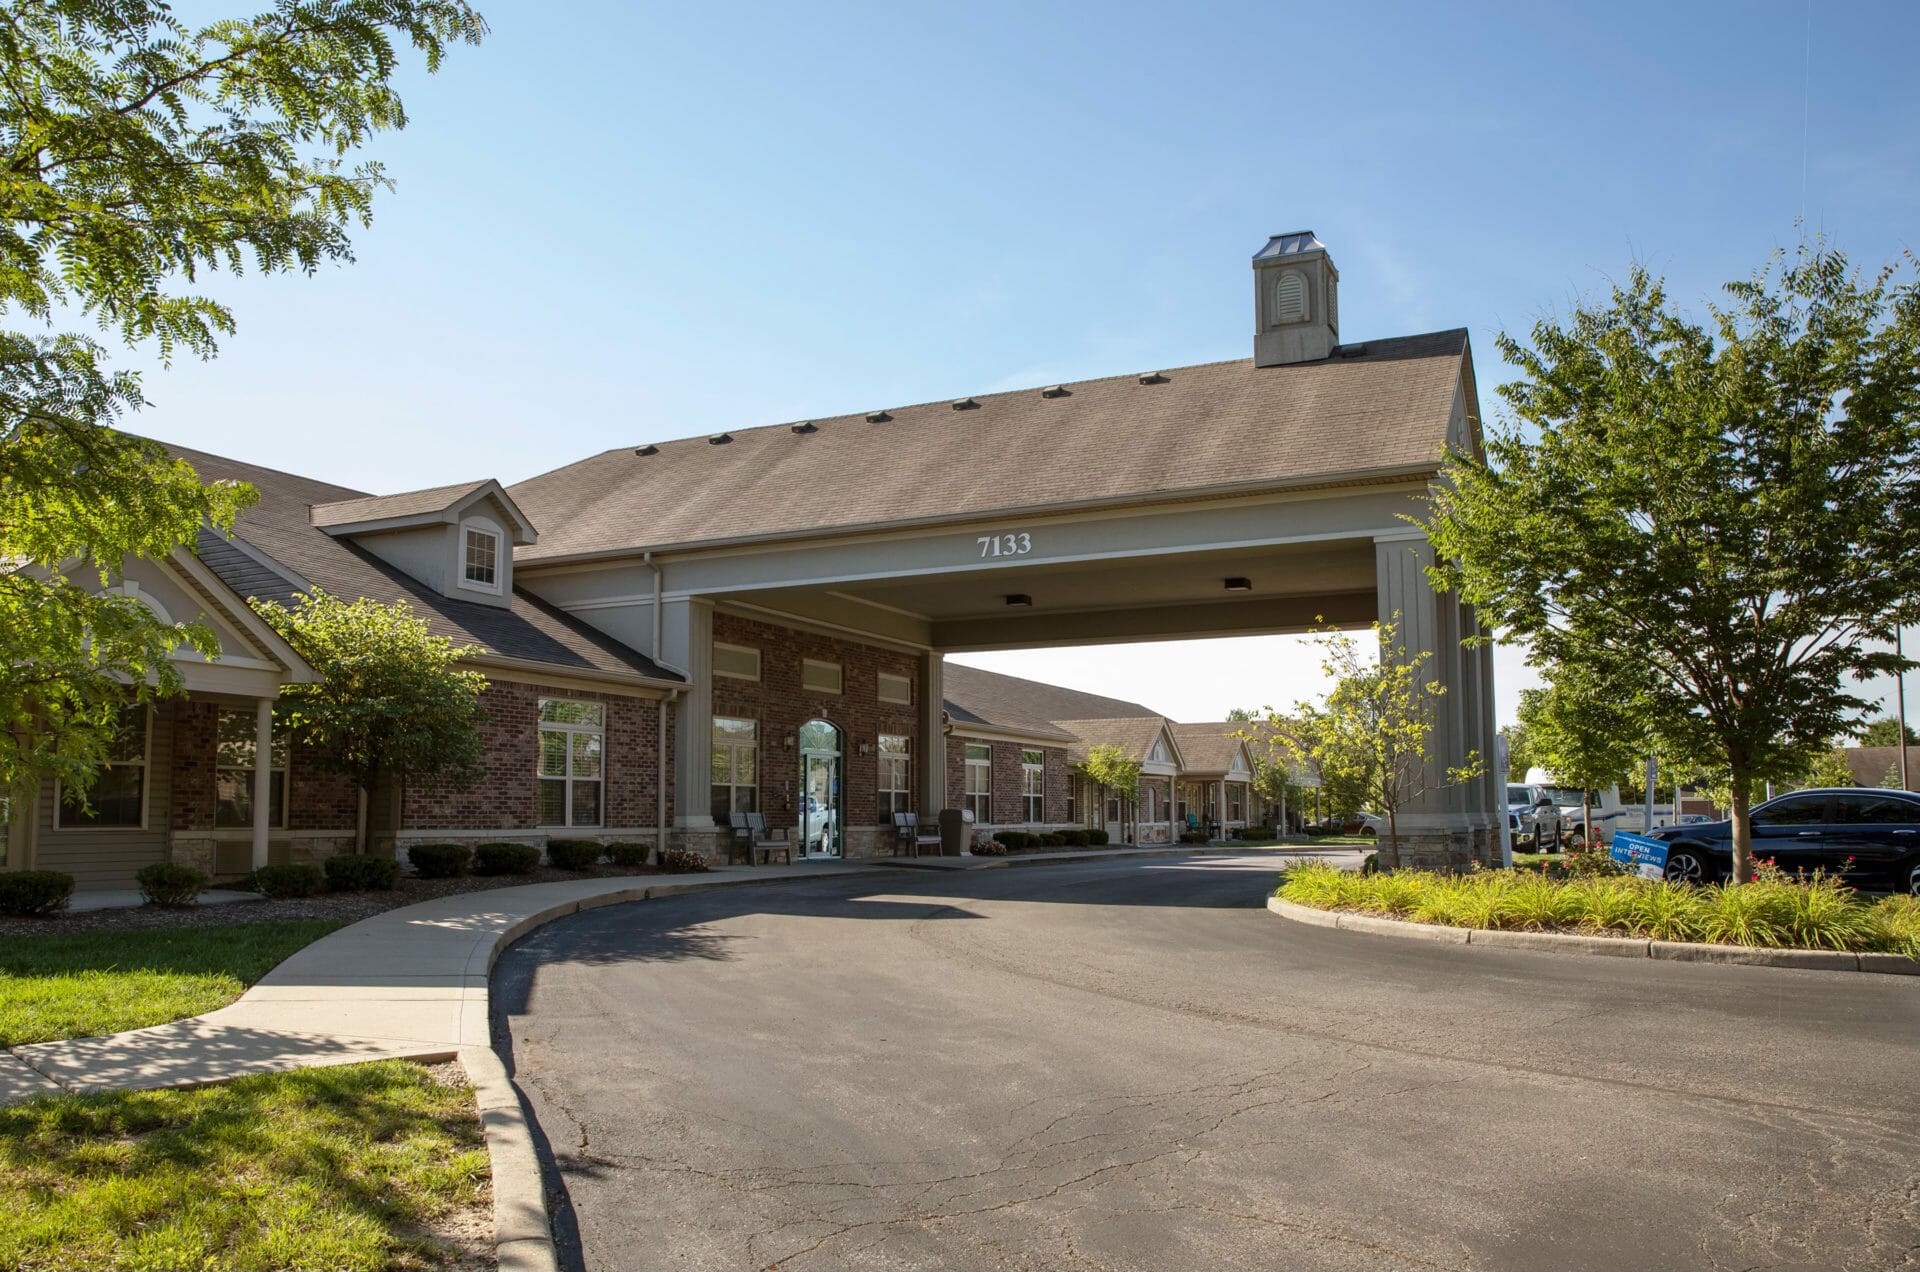 <span  class="uc_style_uc_tiles_grid_image_elementor_uc_items_attribute_title" style="color:#000000;">Brownsburg Meadows Assisted Living Building</span>